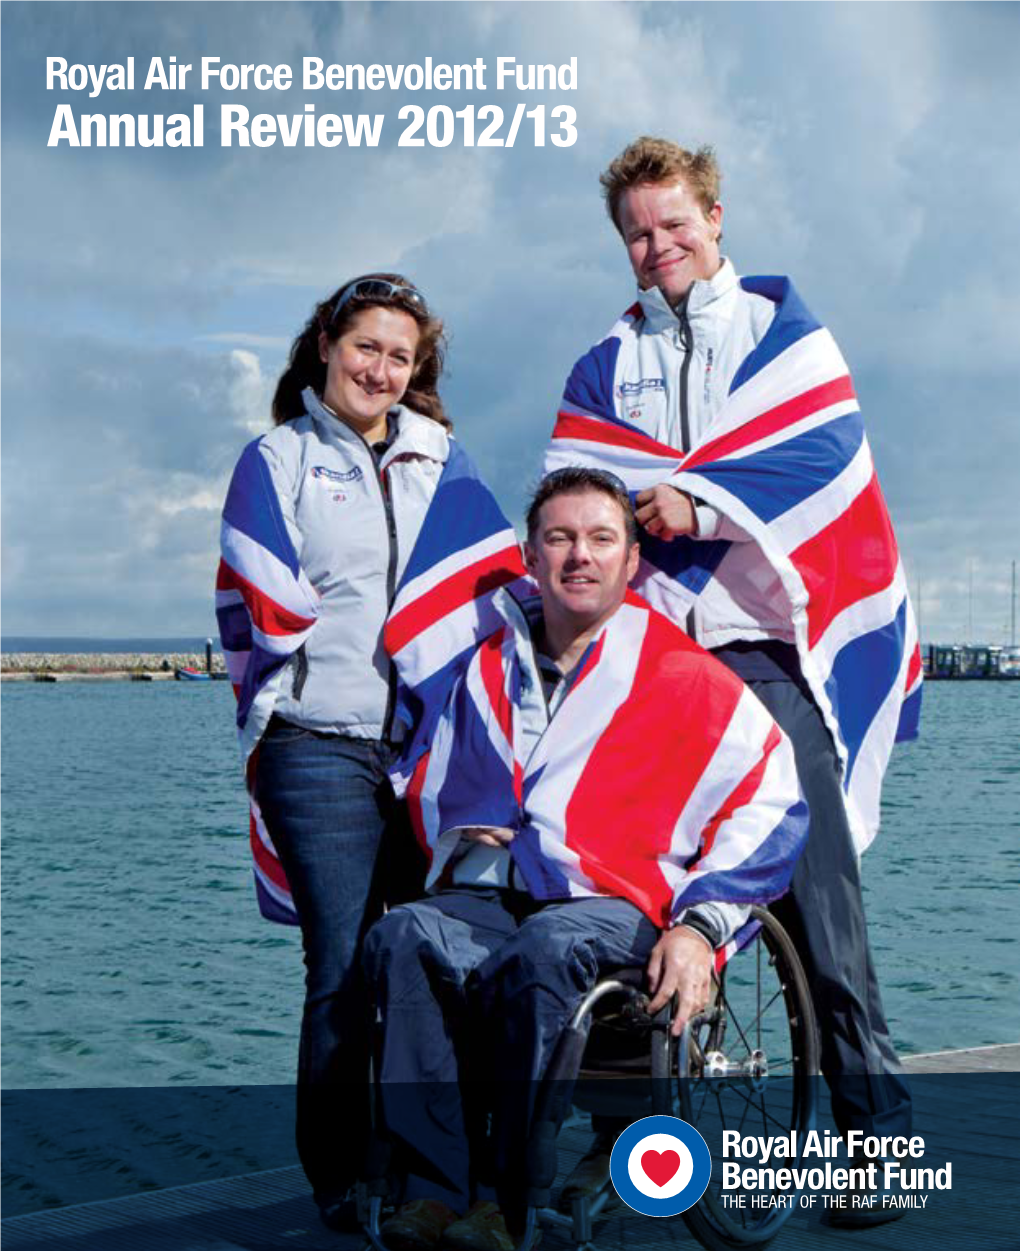 Annual Review 2012/13